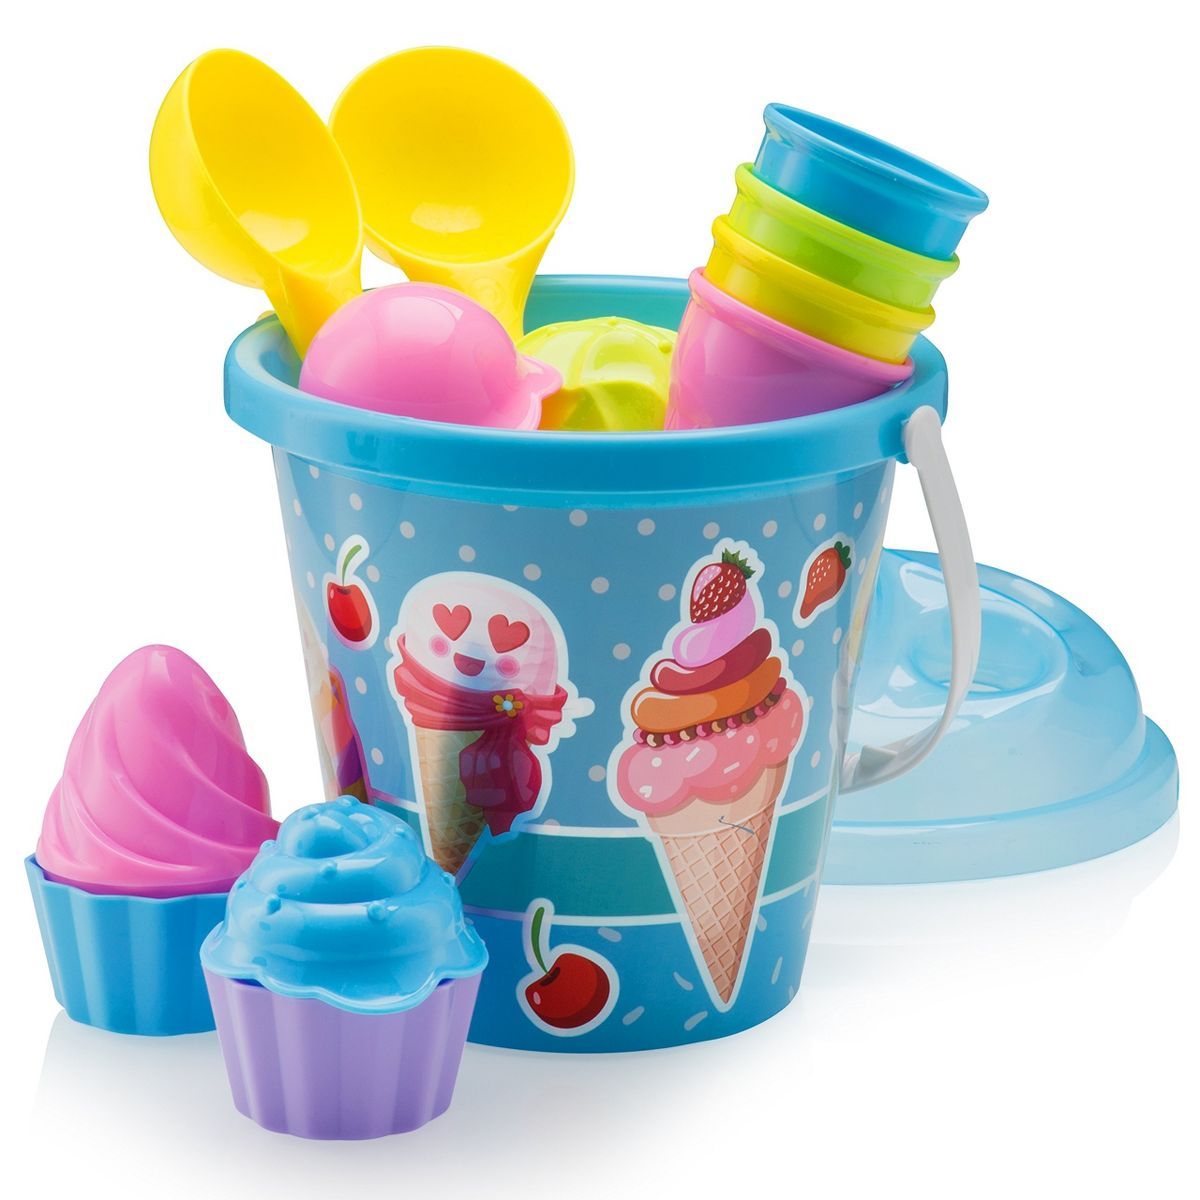 Top Race 9'' Ice Cream Sand Toy - Blue - 16 Pieces | Target